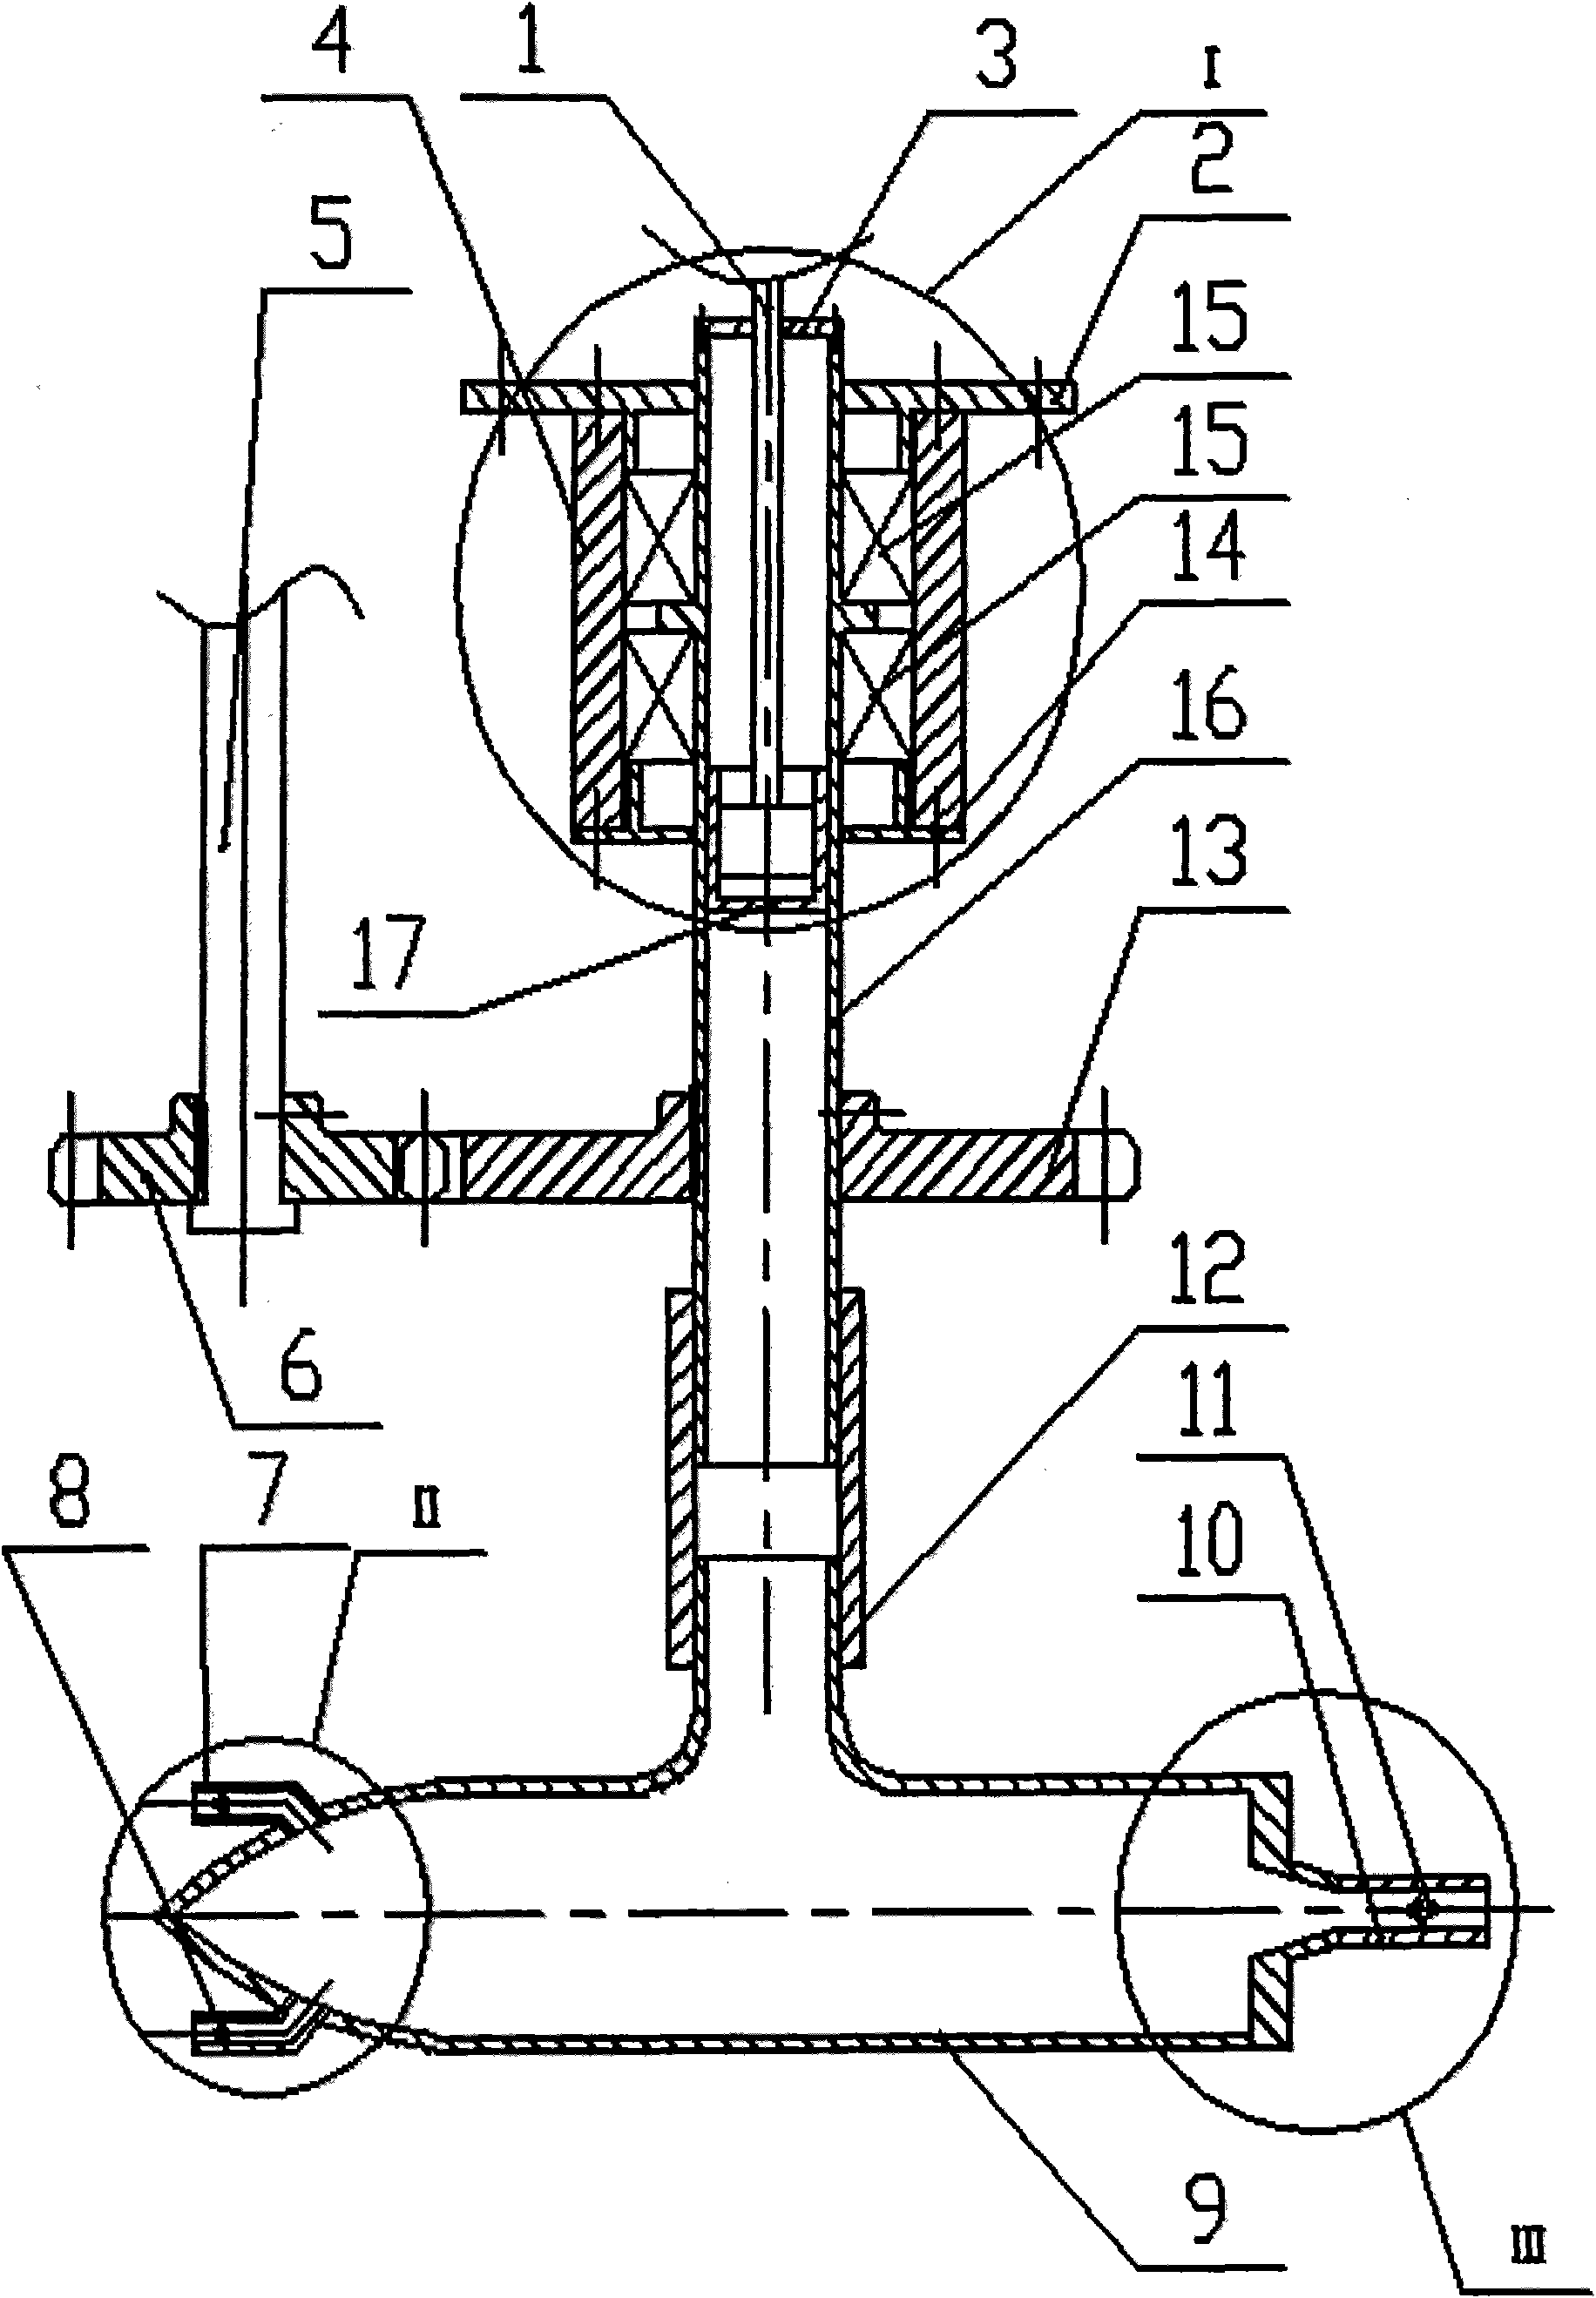 Squid-mantle-like pulse type water-spraying propulsion device